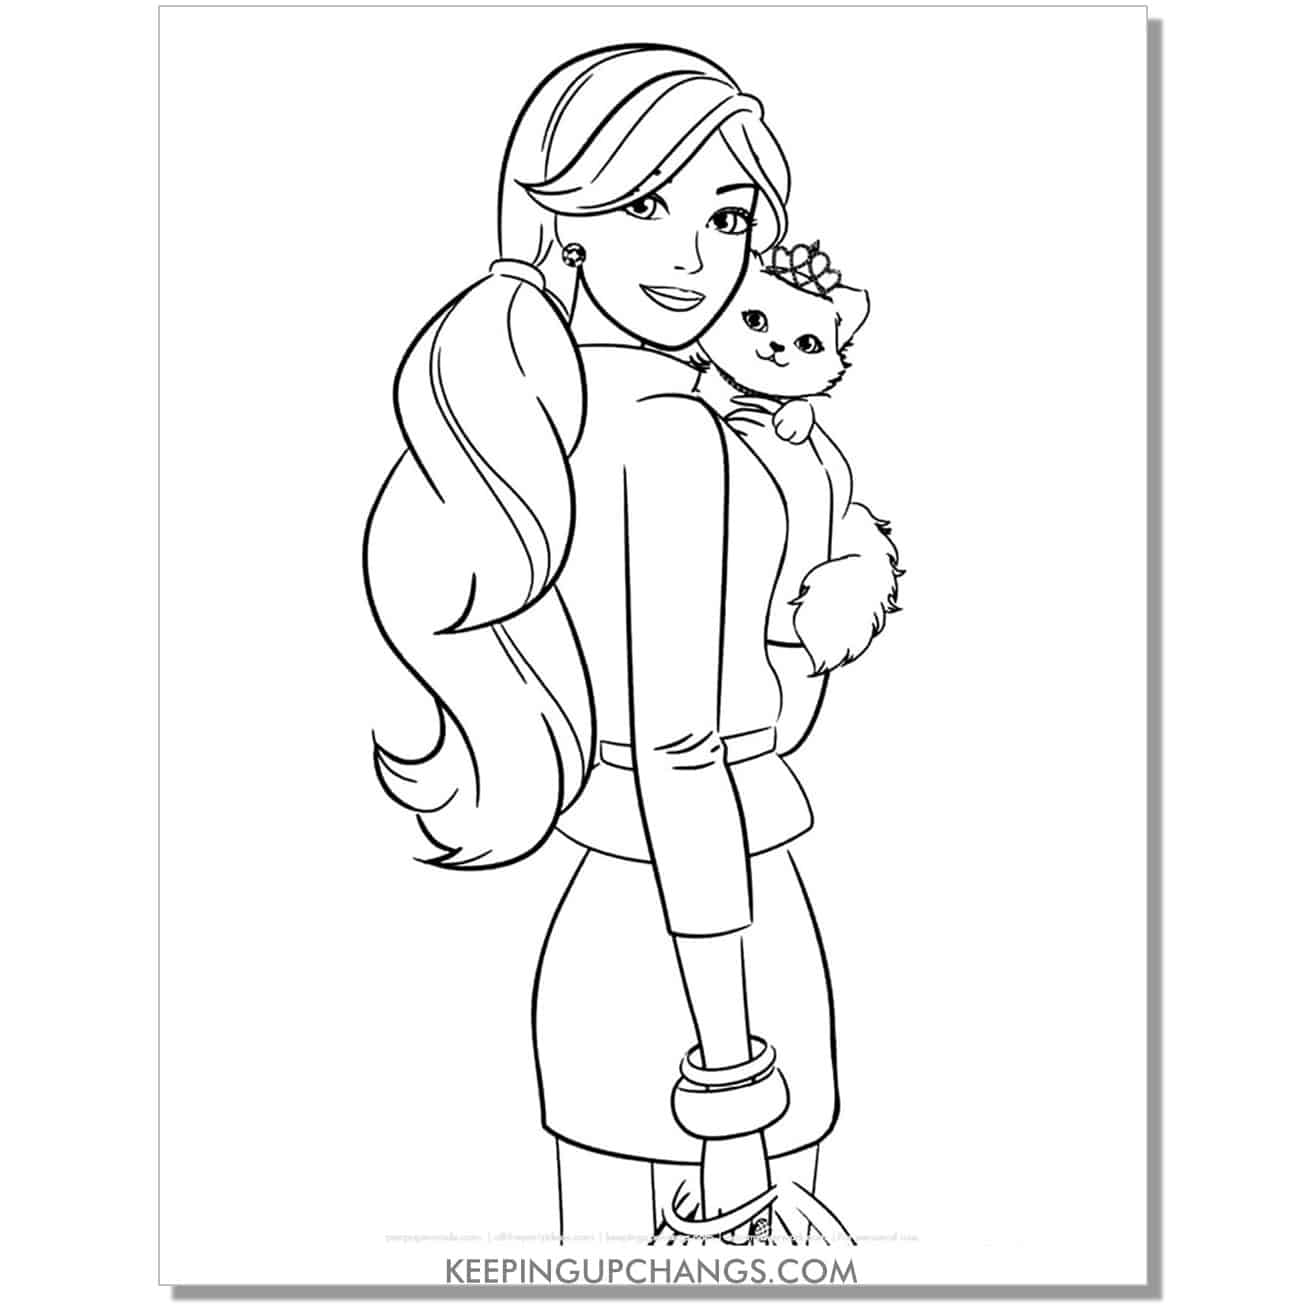 barbie business woman mom with cat coloring page.